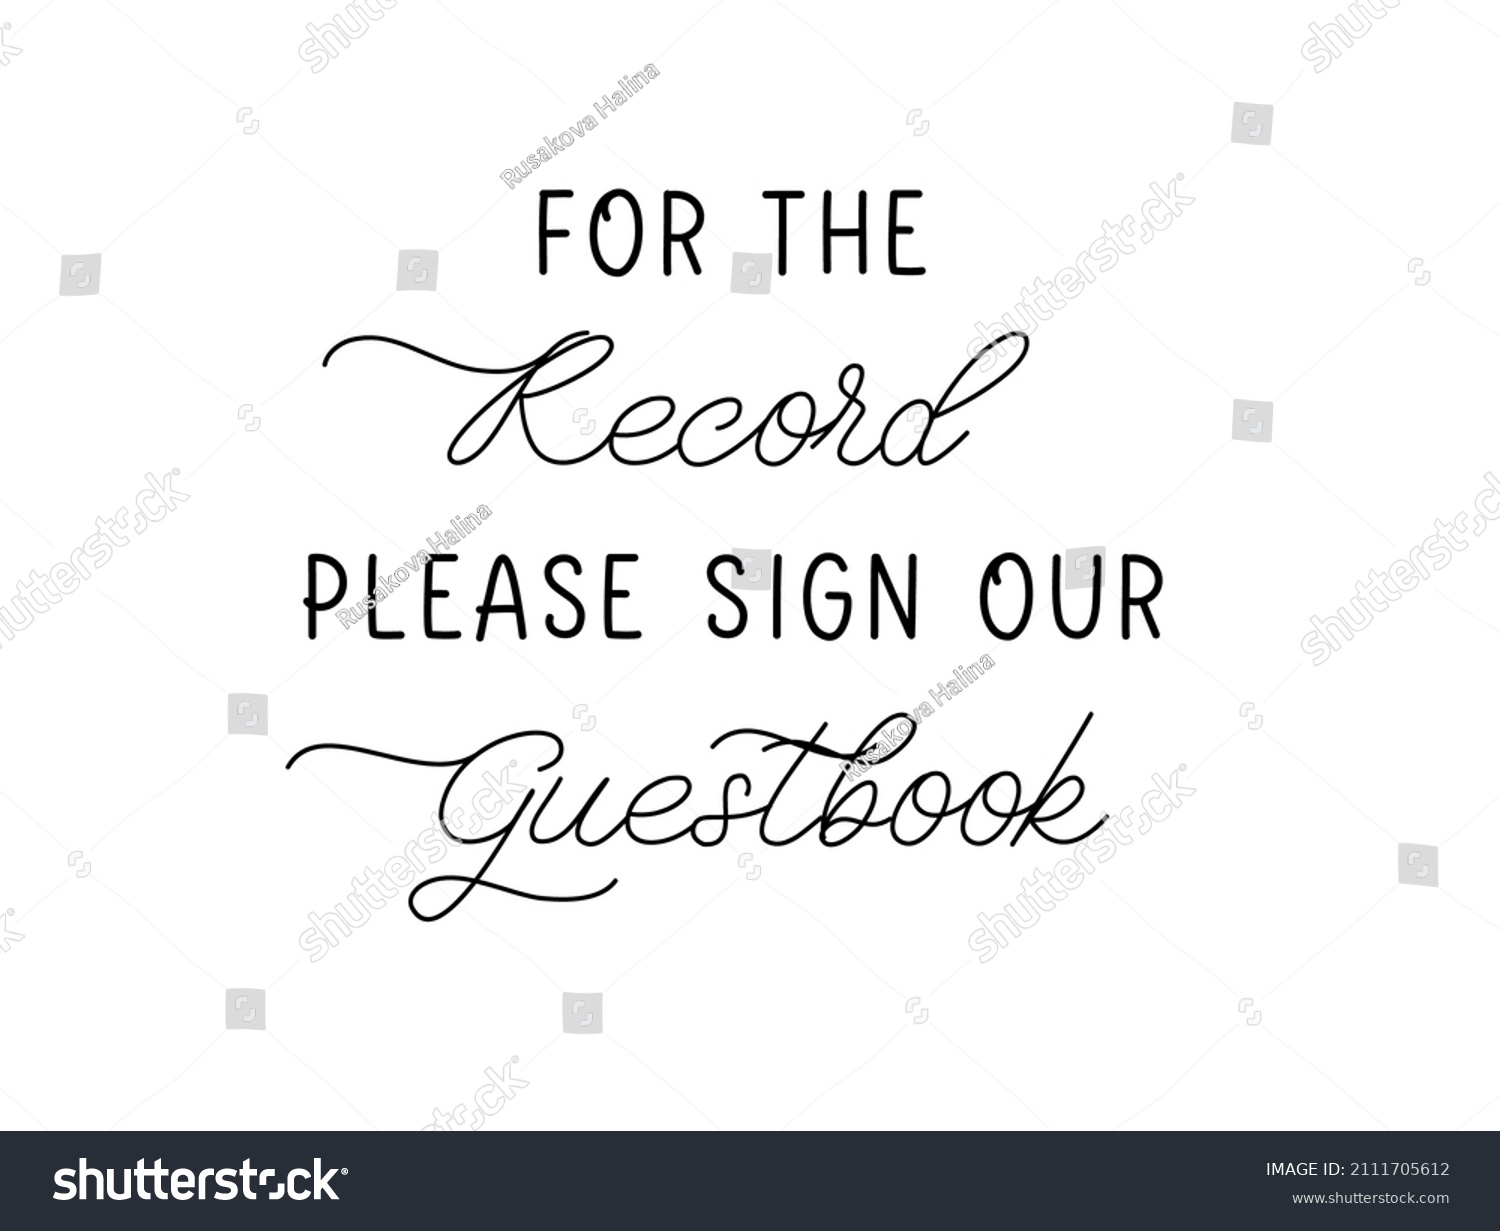 SVG of Please sign our guestbook. Wedding lettering design. Groom and bride marriage quote. Love phrase svg